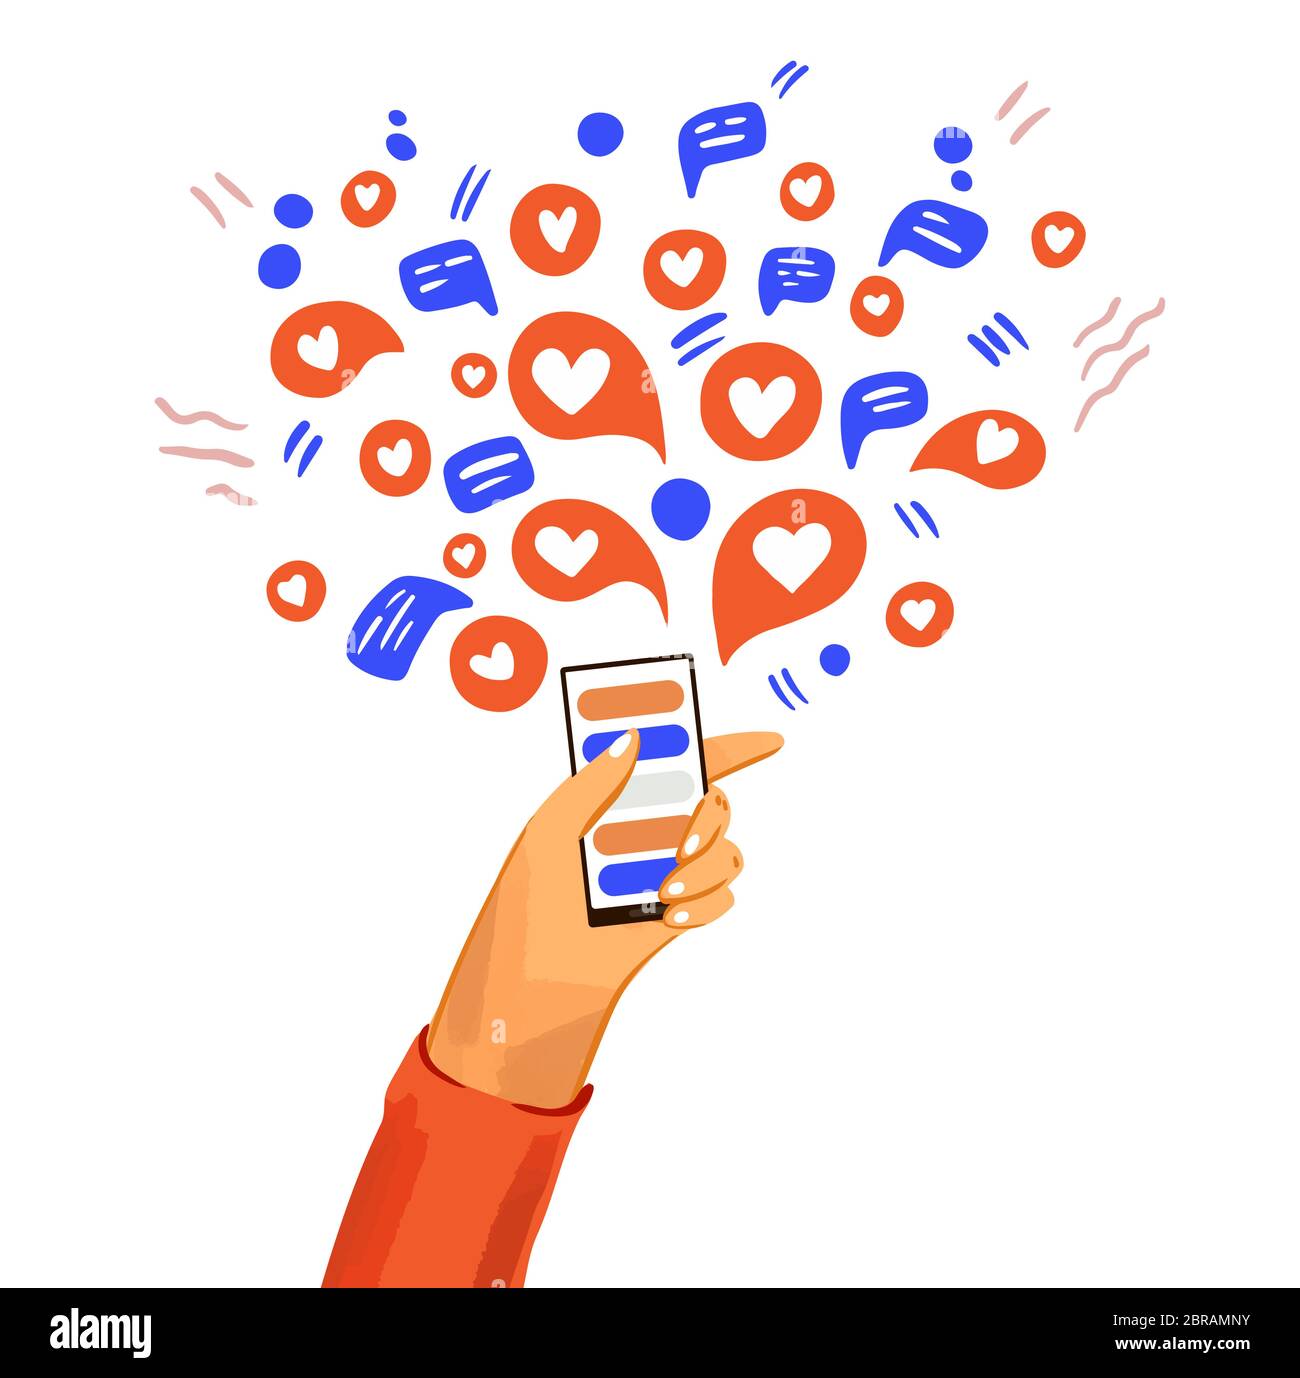 Hand with phone vector cartoon illustration. Smartphone with messenger, online chat, like, message signs, icons and social engagement. Happy friendly Stock Vector